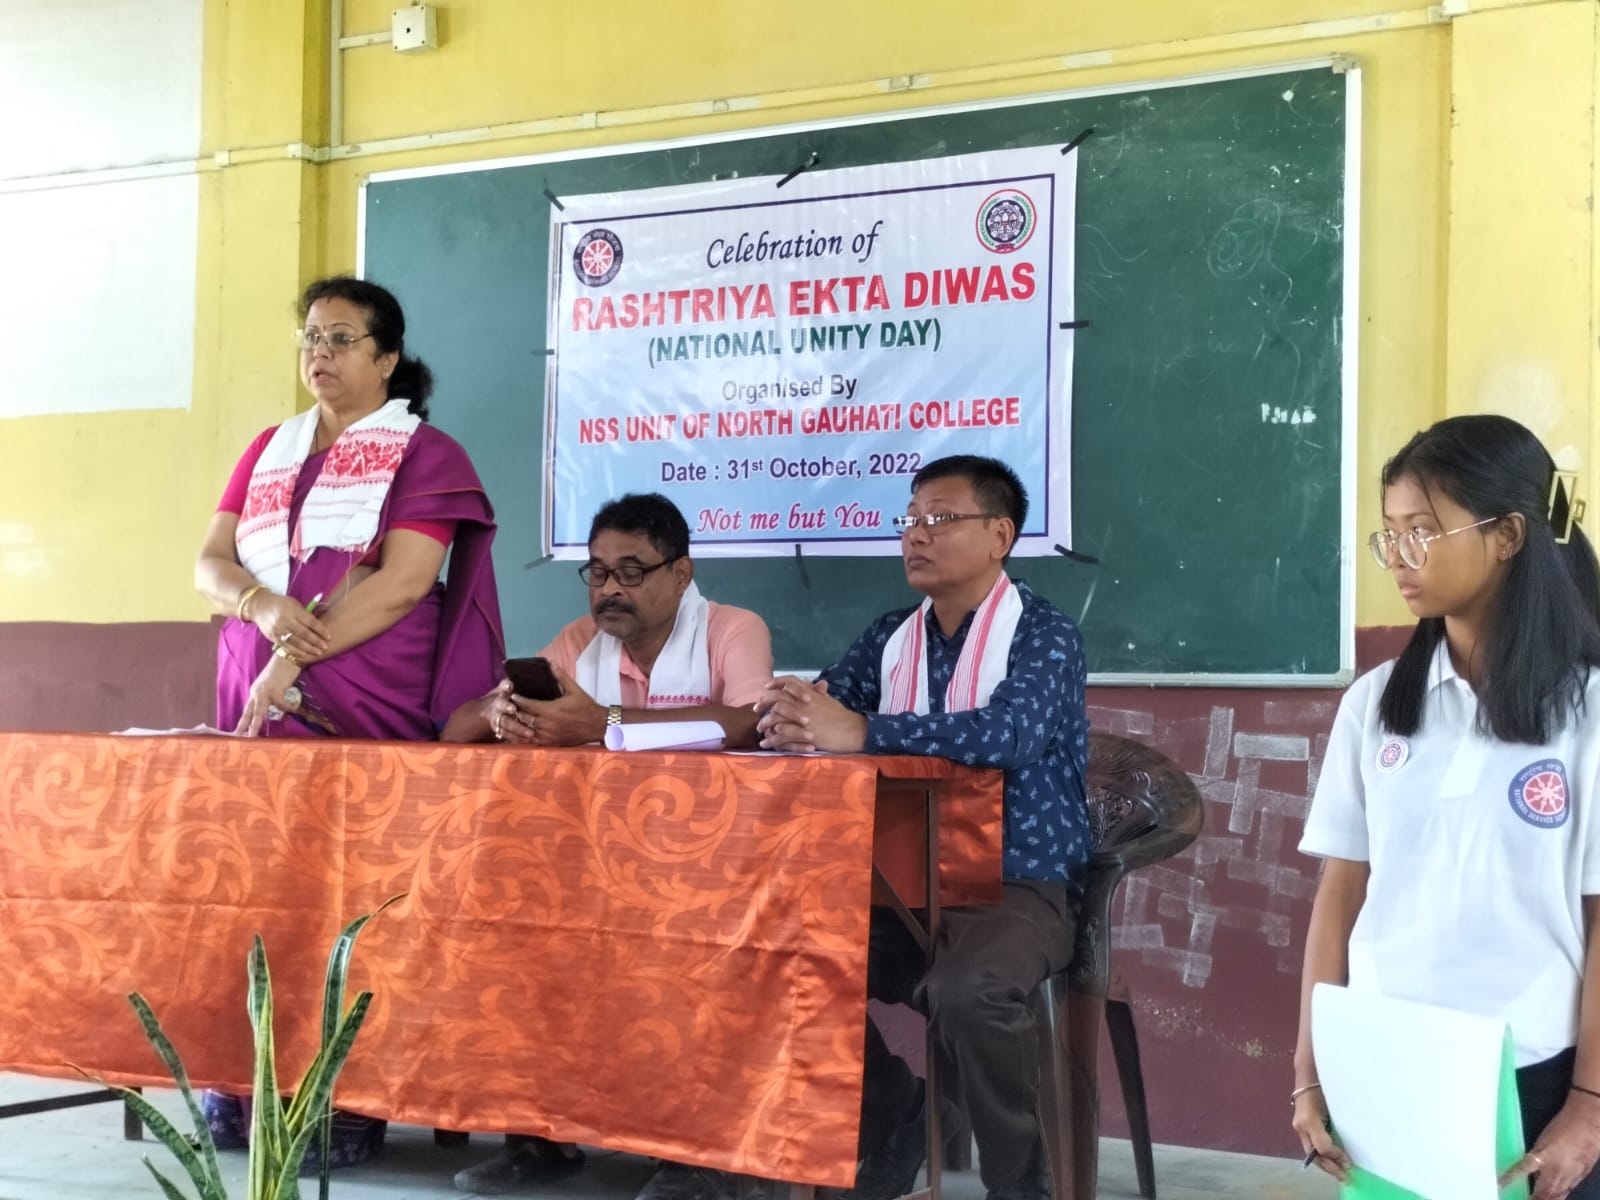 Celebration of National Unity Day by NSS unit of North Gauhati College on 31st October, 2022